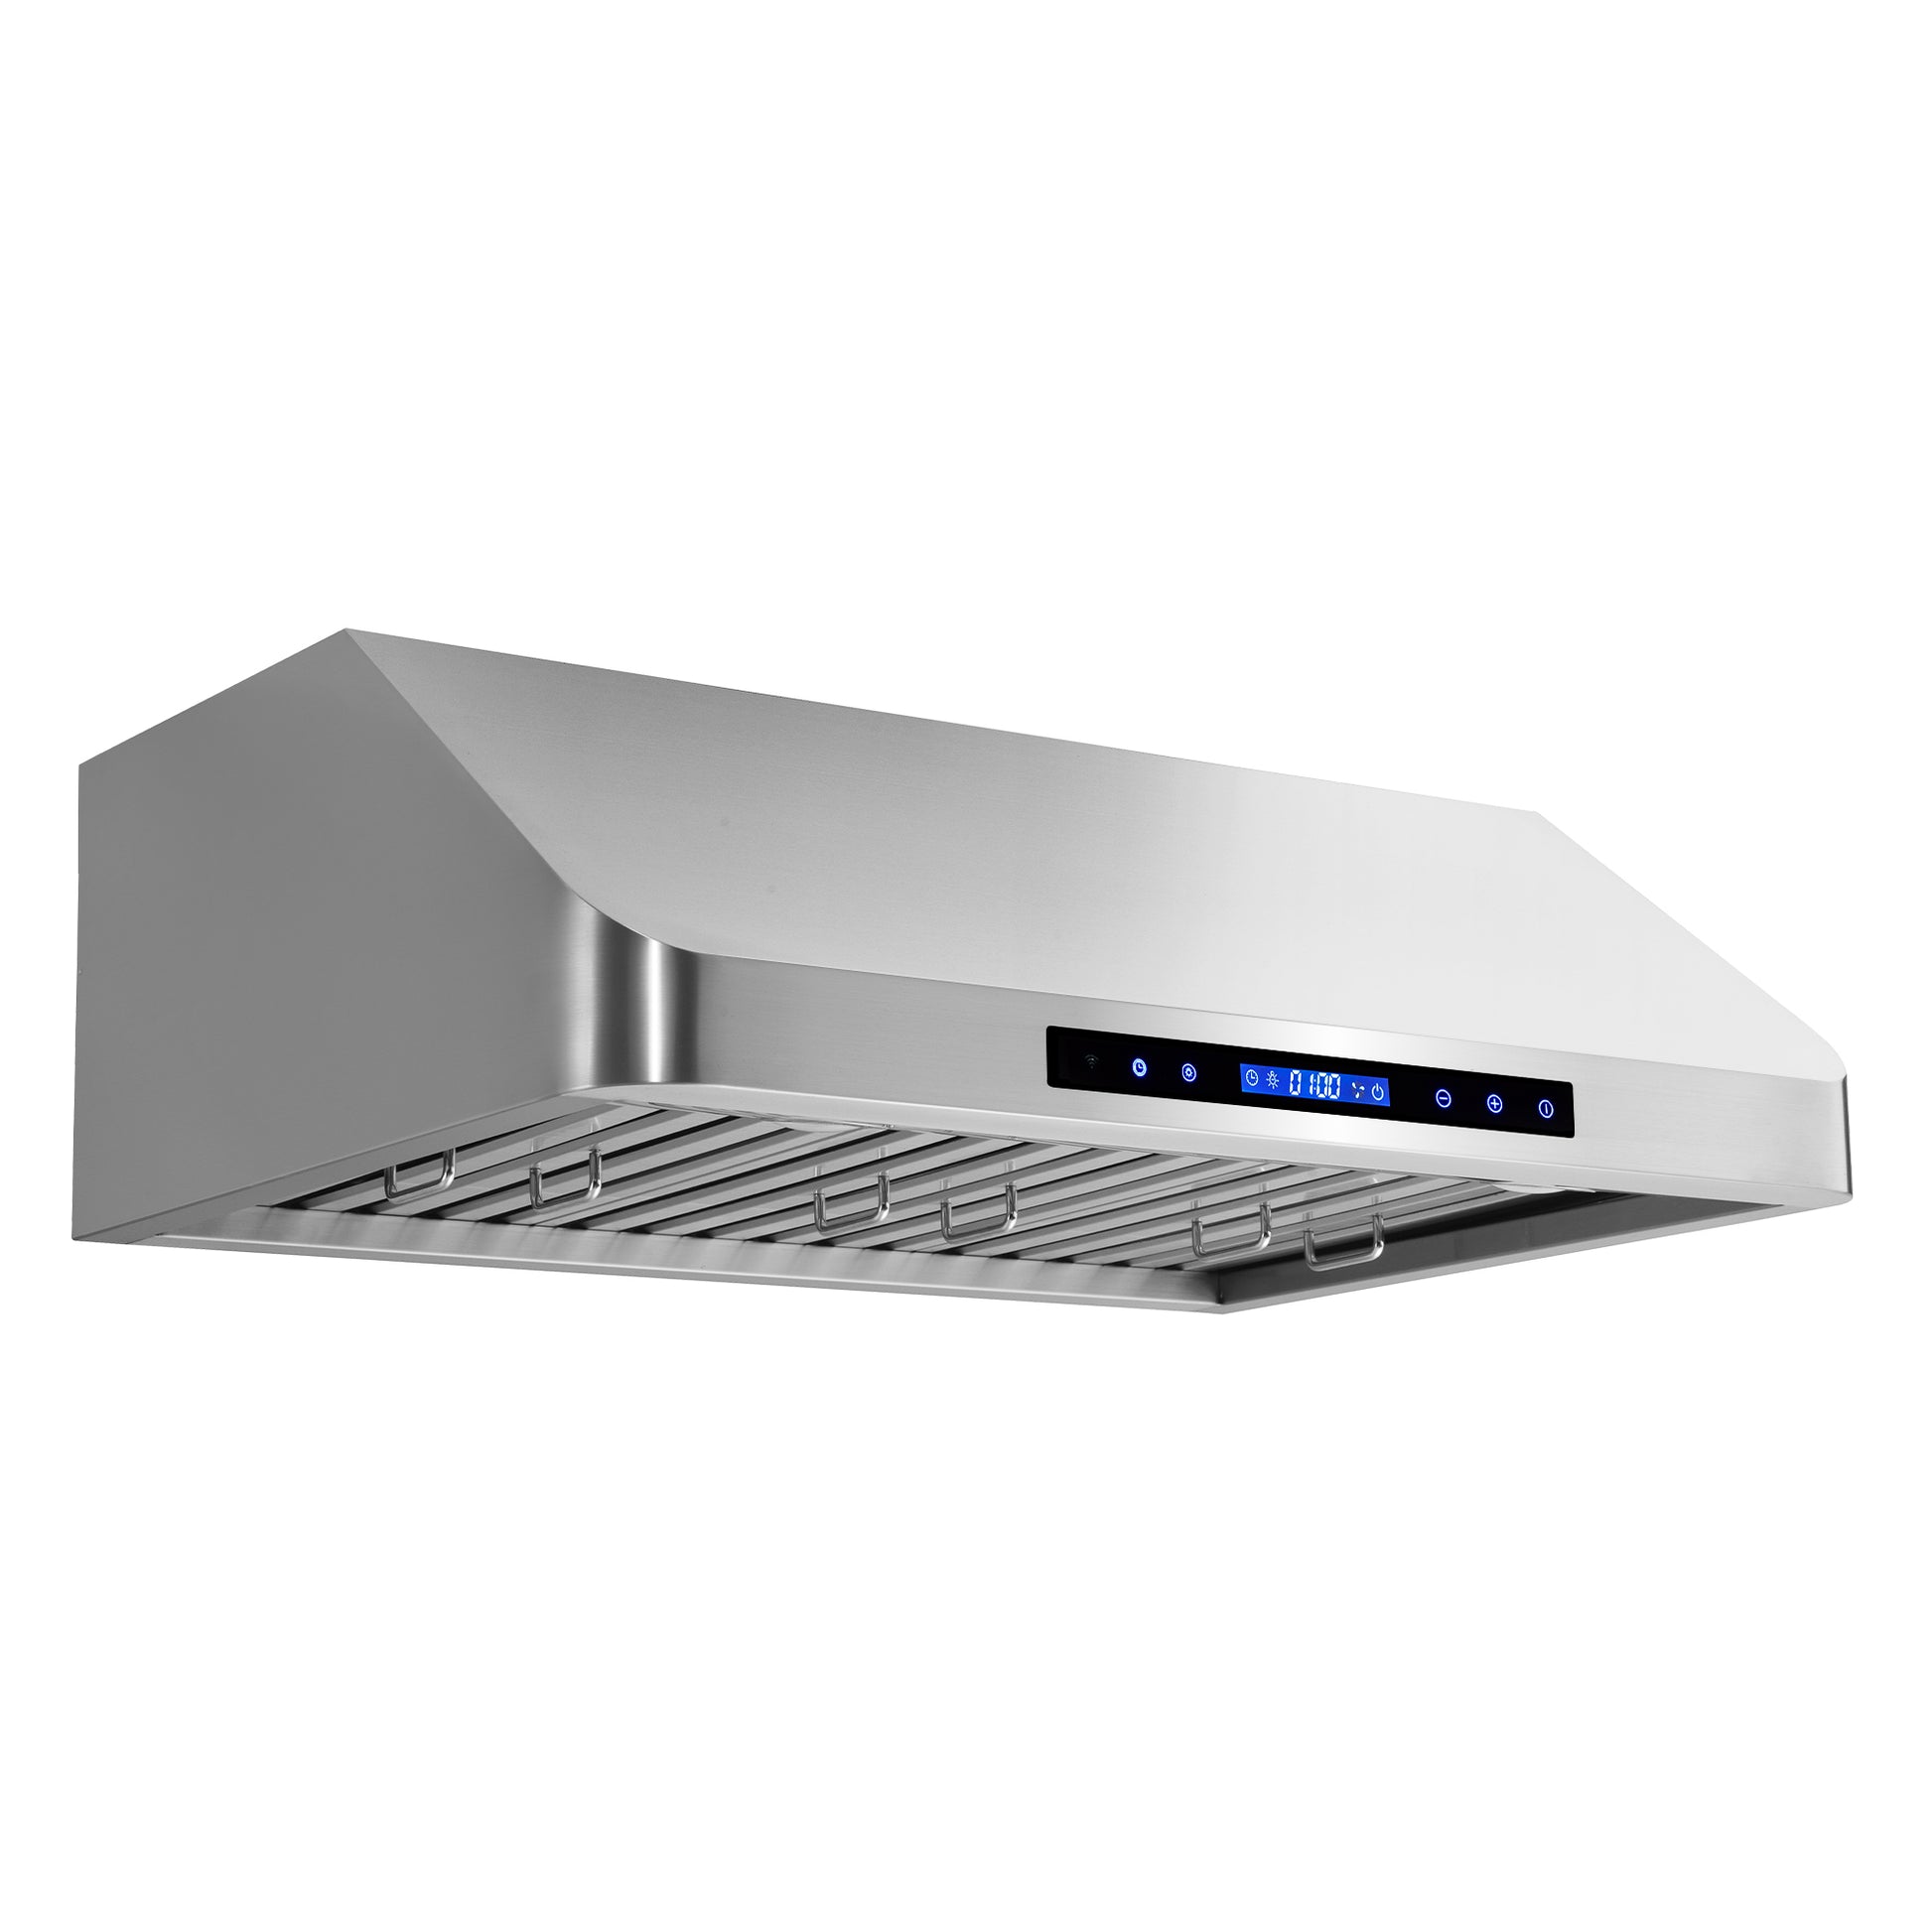 Cosmo 30 in. Stainless Steel  Ducted Under Cabinet Range Hood with Touch Display, LED Lighting and Permanent Filters 500 CFM